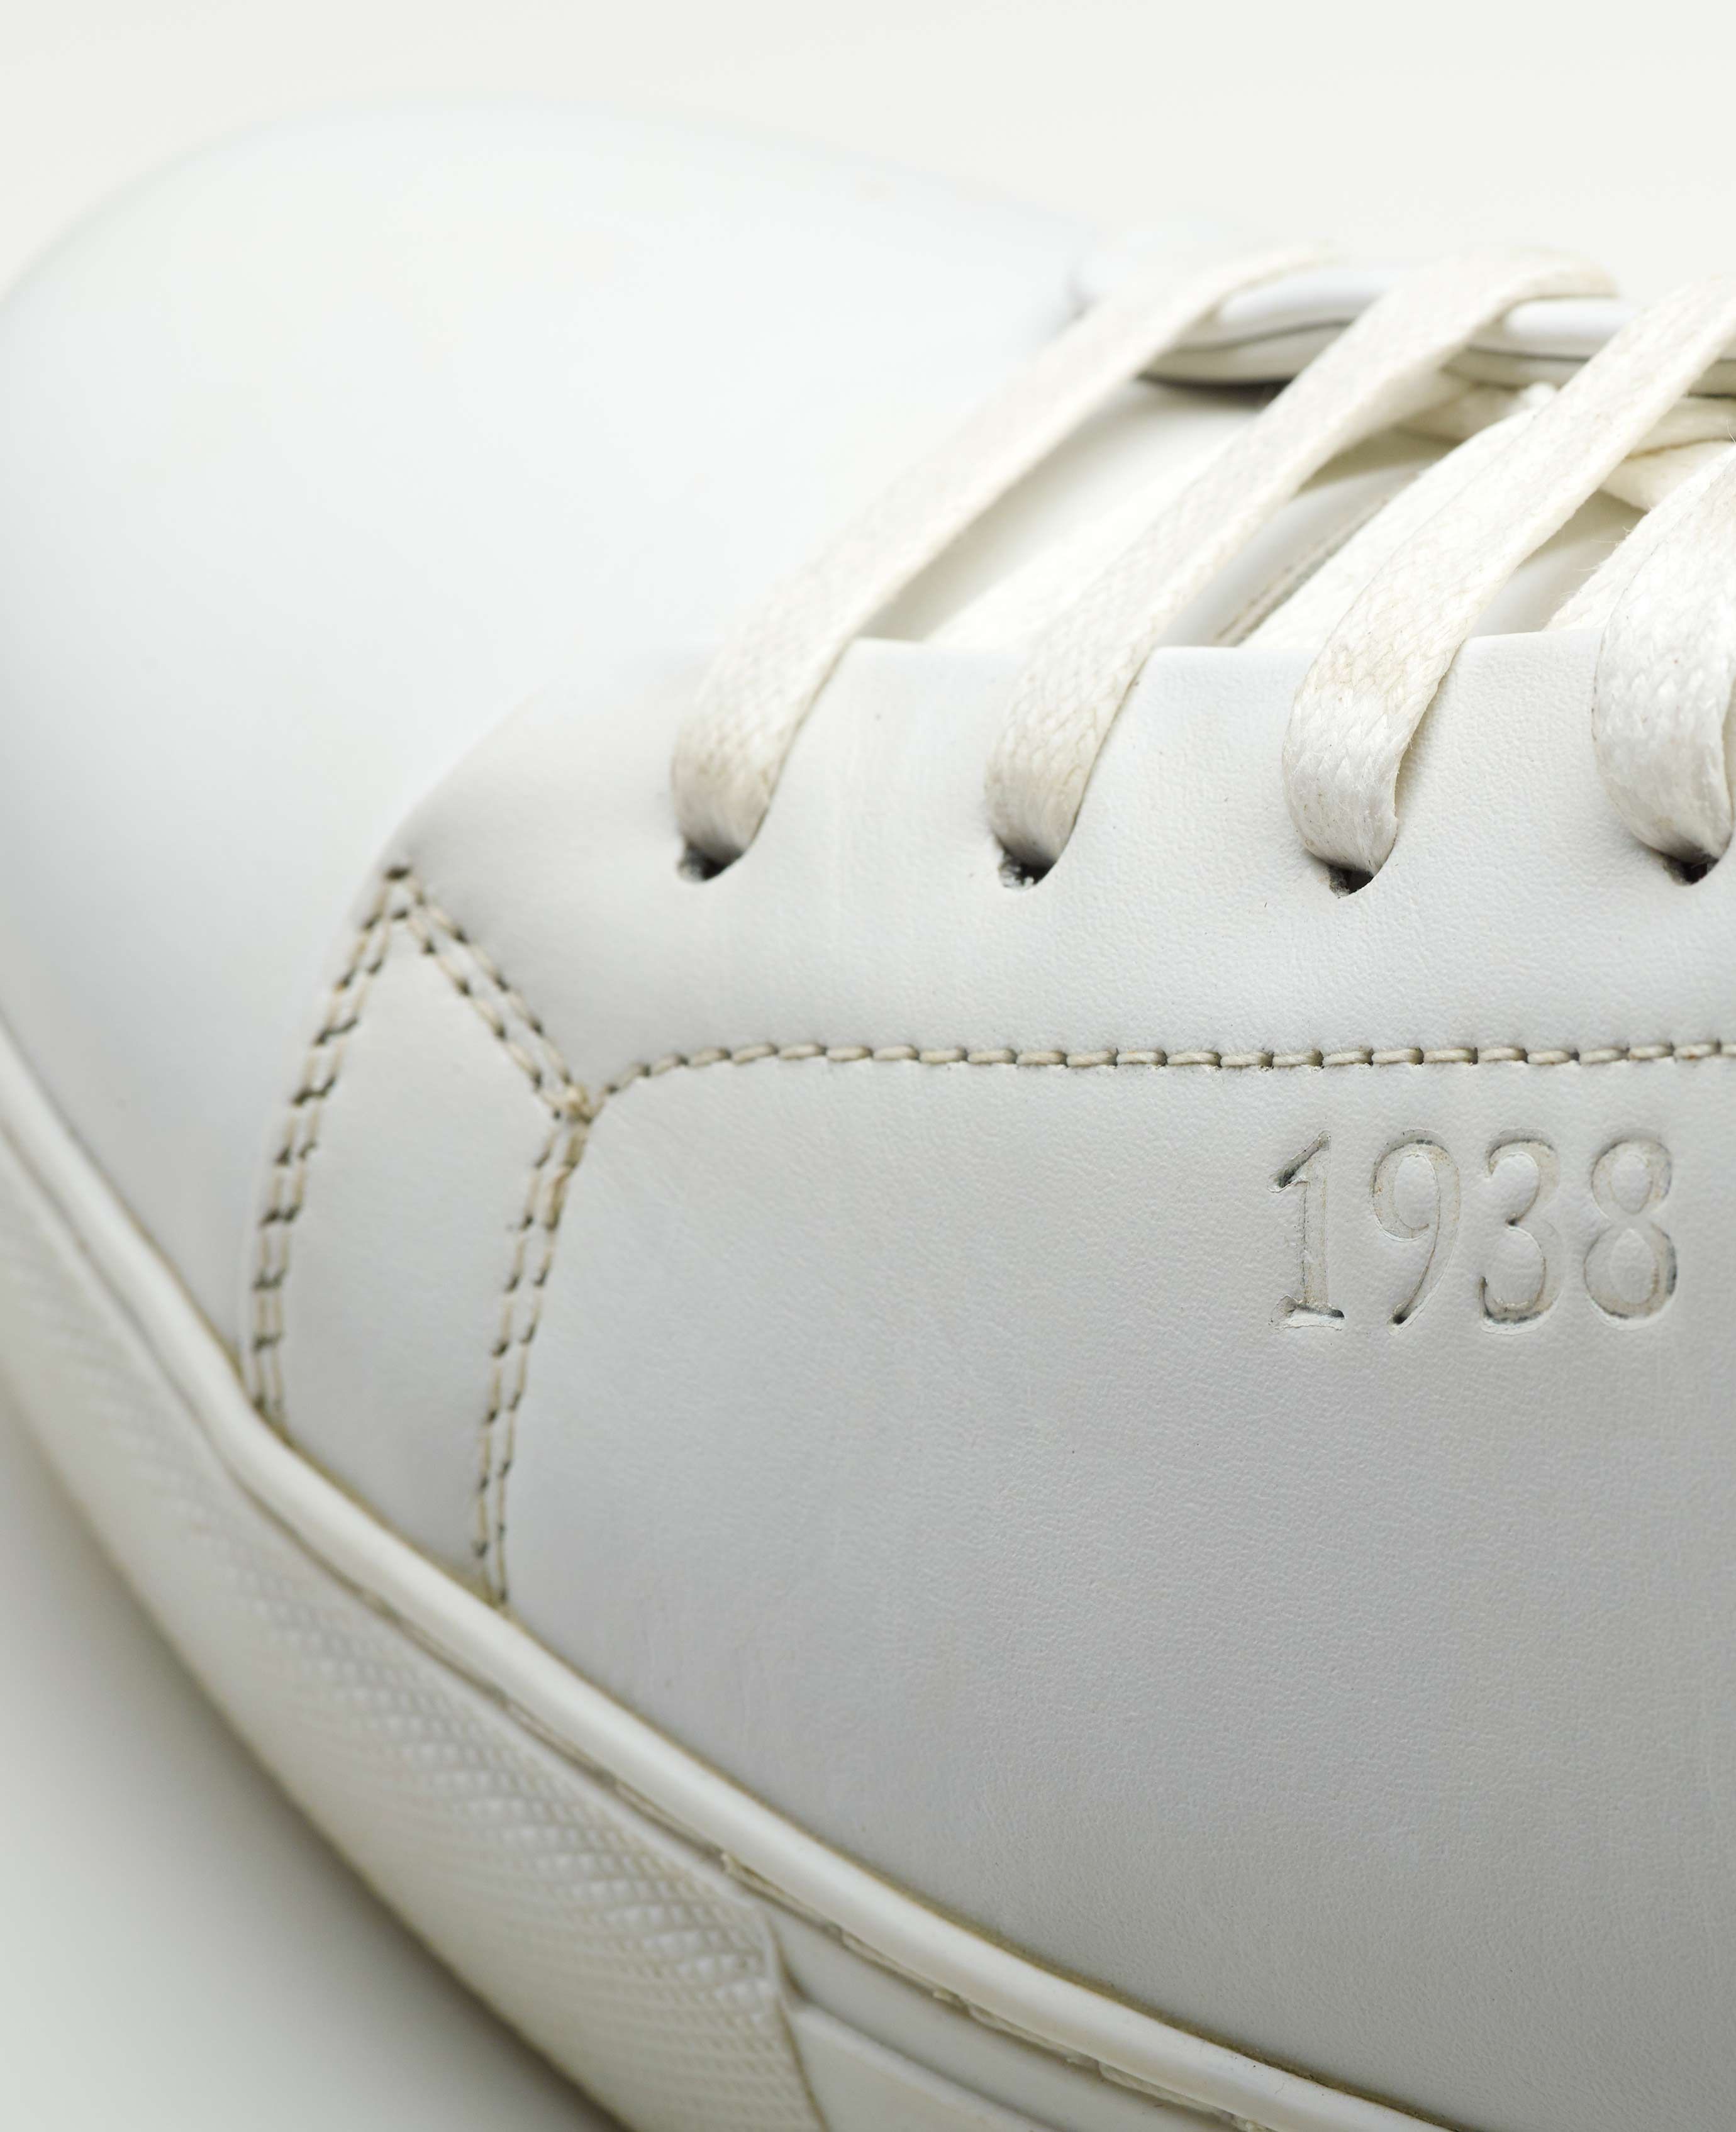 Men's white leather trainers